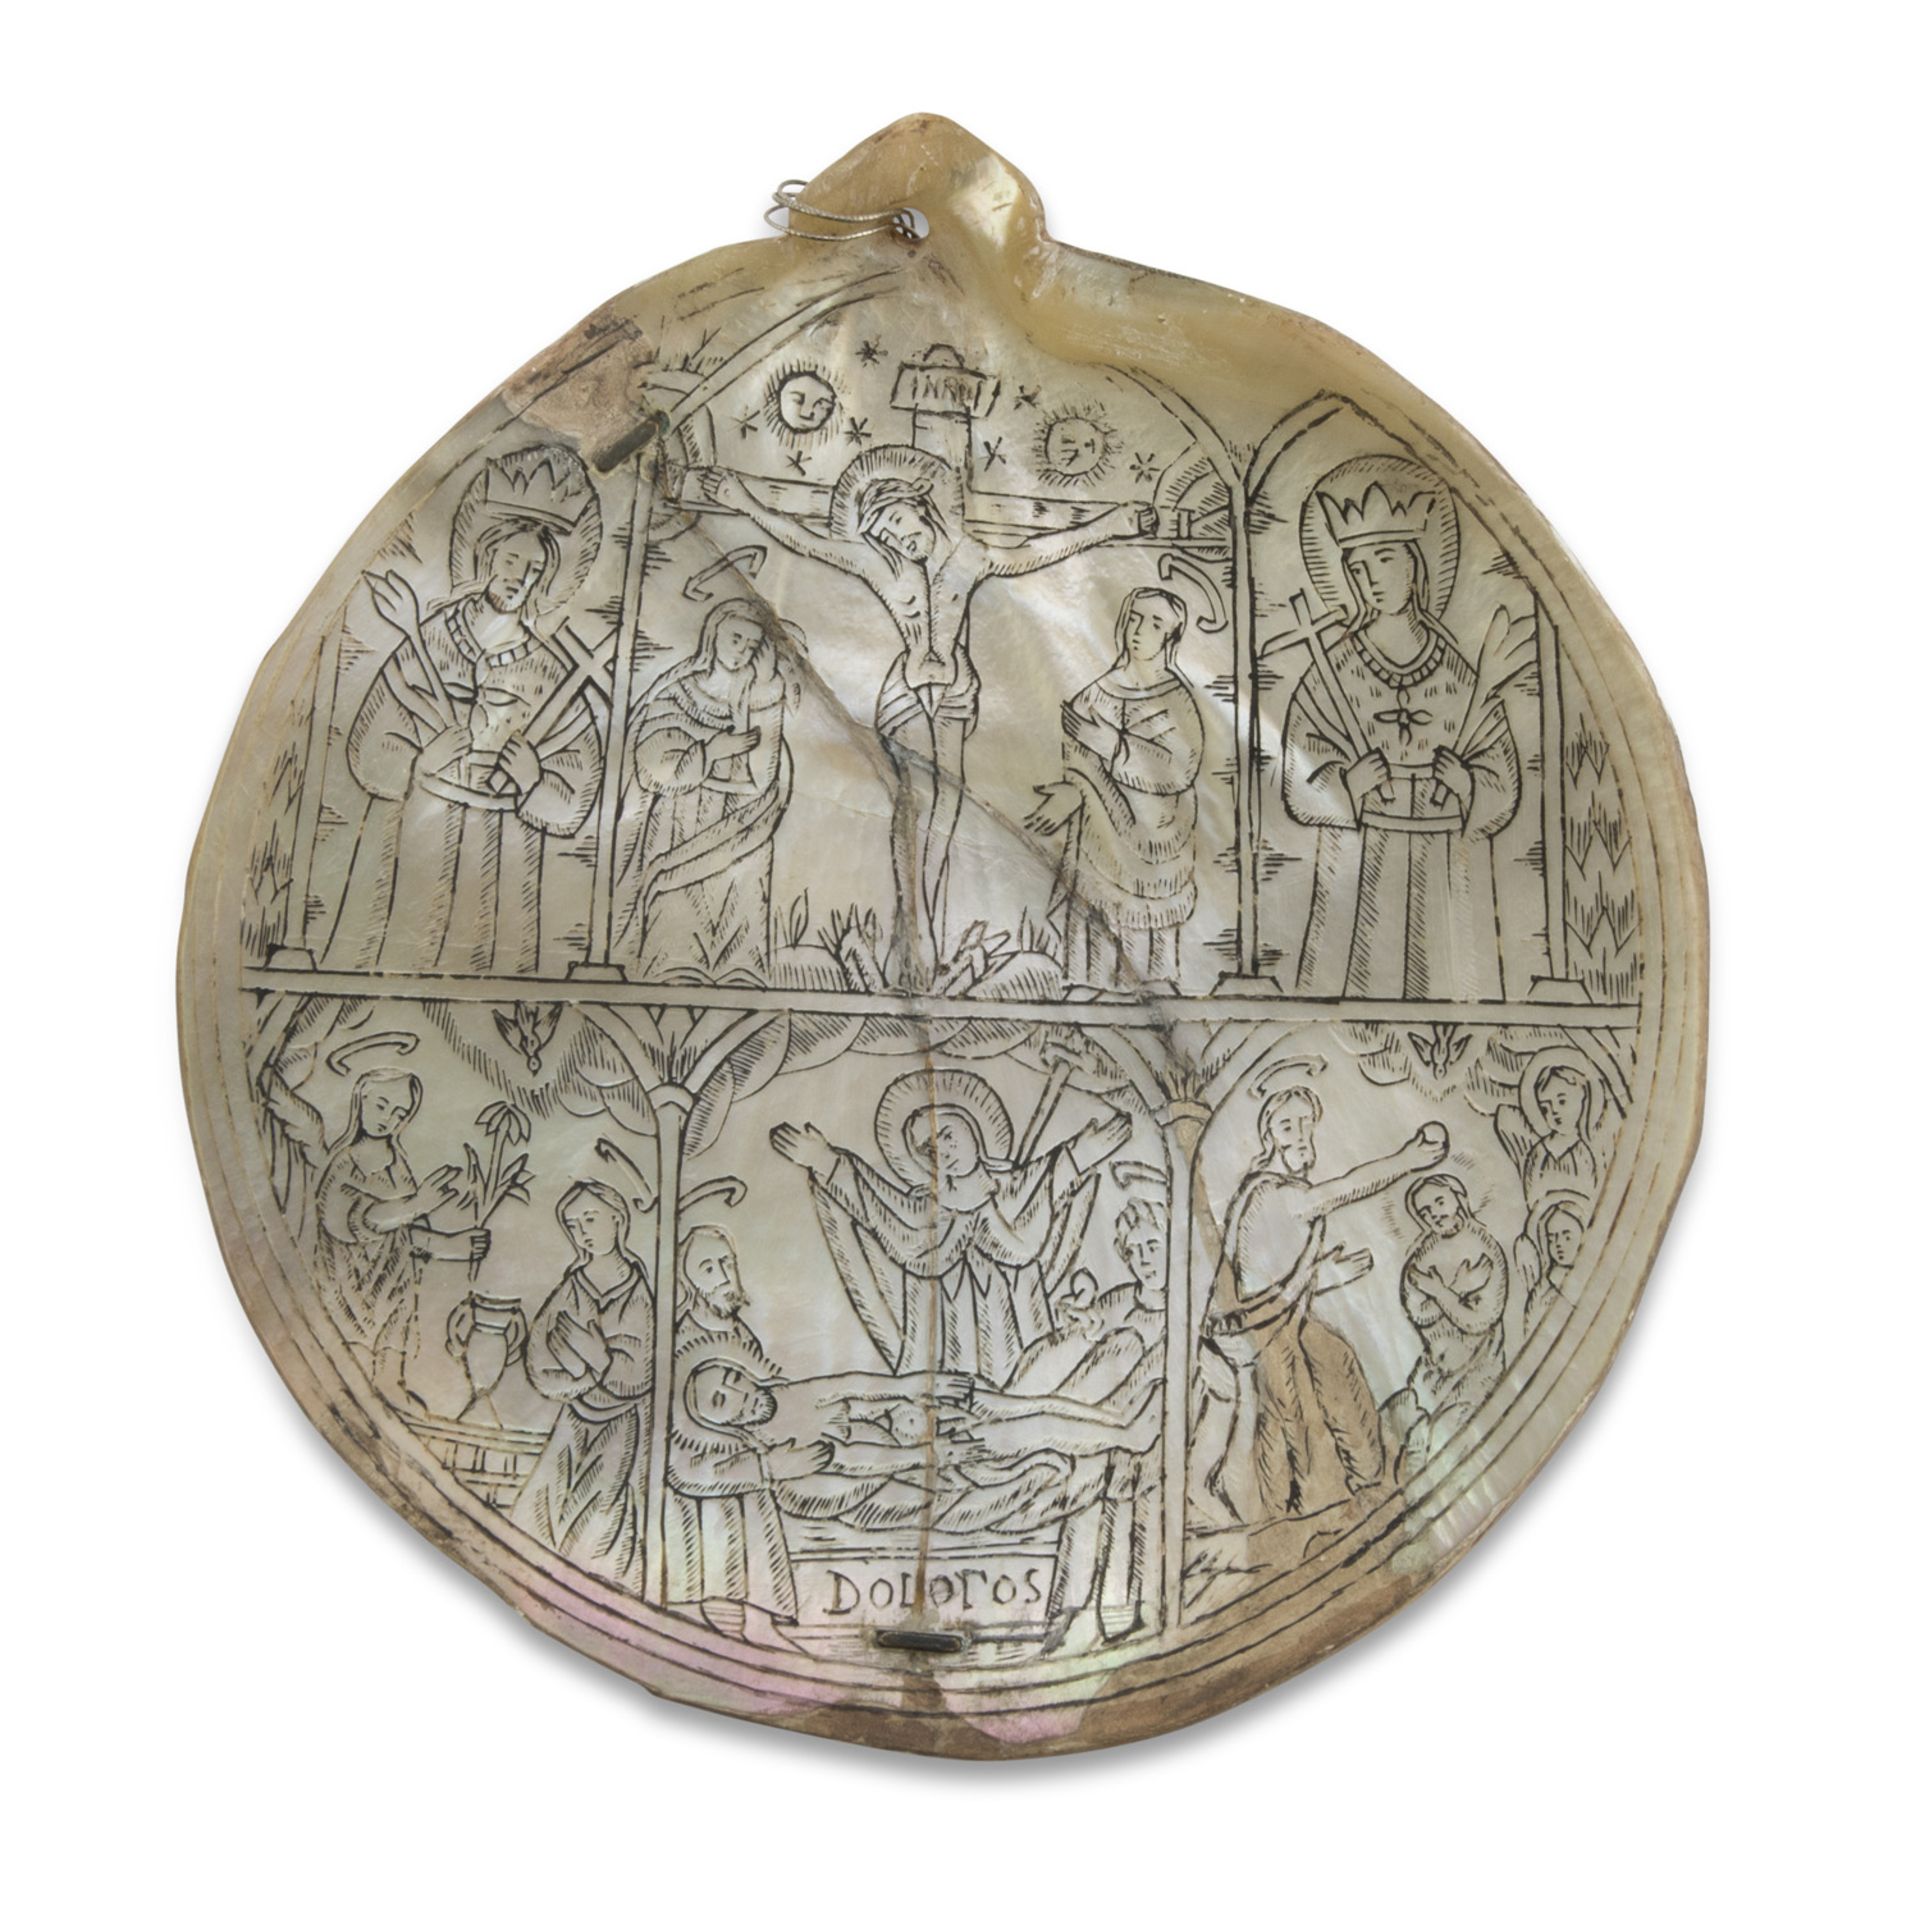 NACRE SHELL, TRAPANI 18TH CENTURY engraved with devotional motifs and crucifixion. Measures cm. 12 x